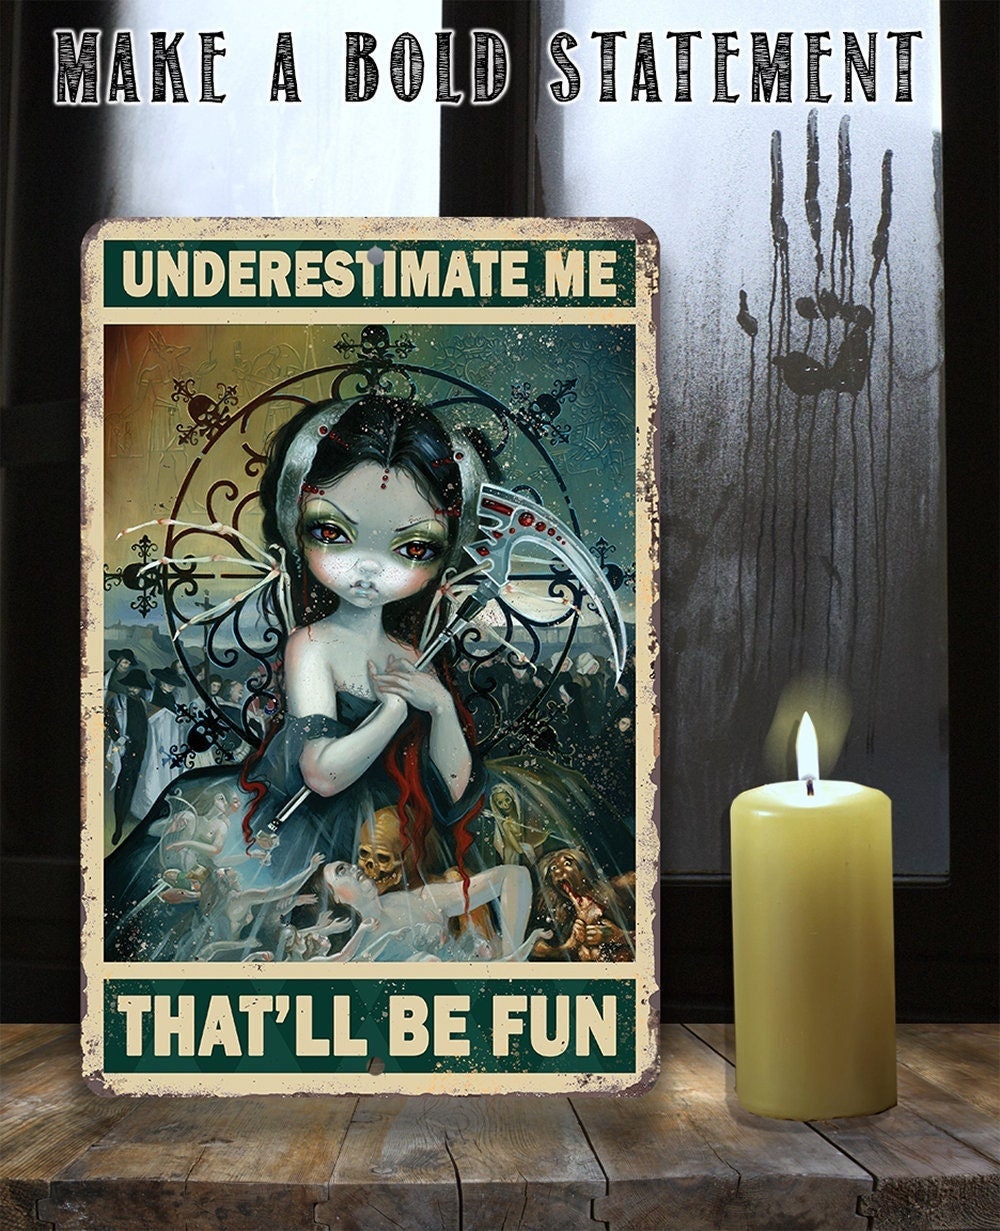 Underestimate Me That'll Be Fun - 8" x 12" or 12" x 18" Aluminum Tin Awesome Metal Poster Lone Star Art 